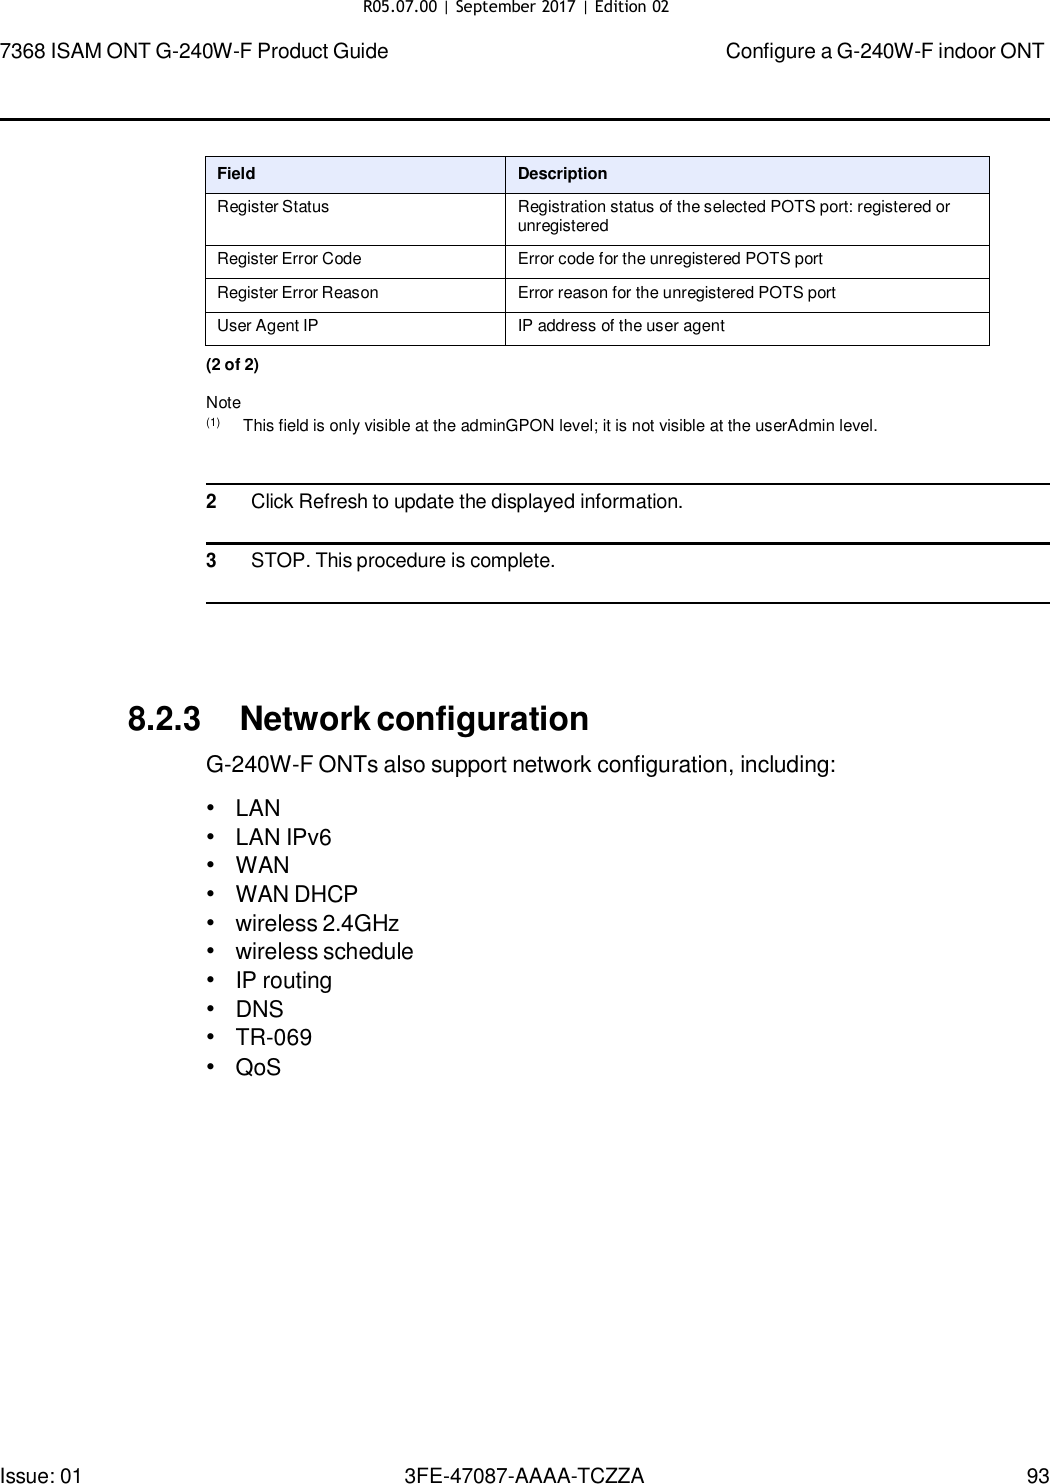 Page 87 of Nokia Bell G240WFV2 7368 ISAM GPON ONU User Manual 7368 ISAM ONT G 240W F Product Guide